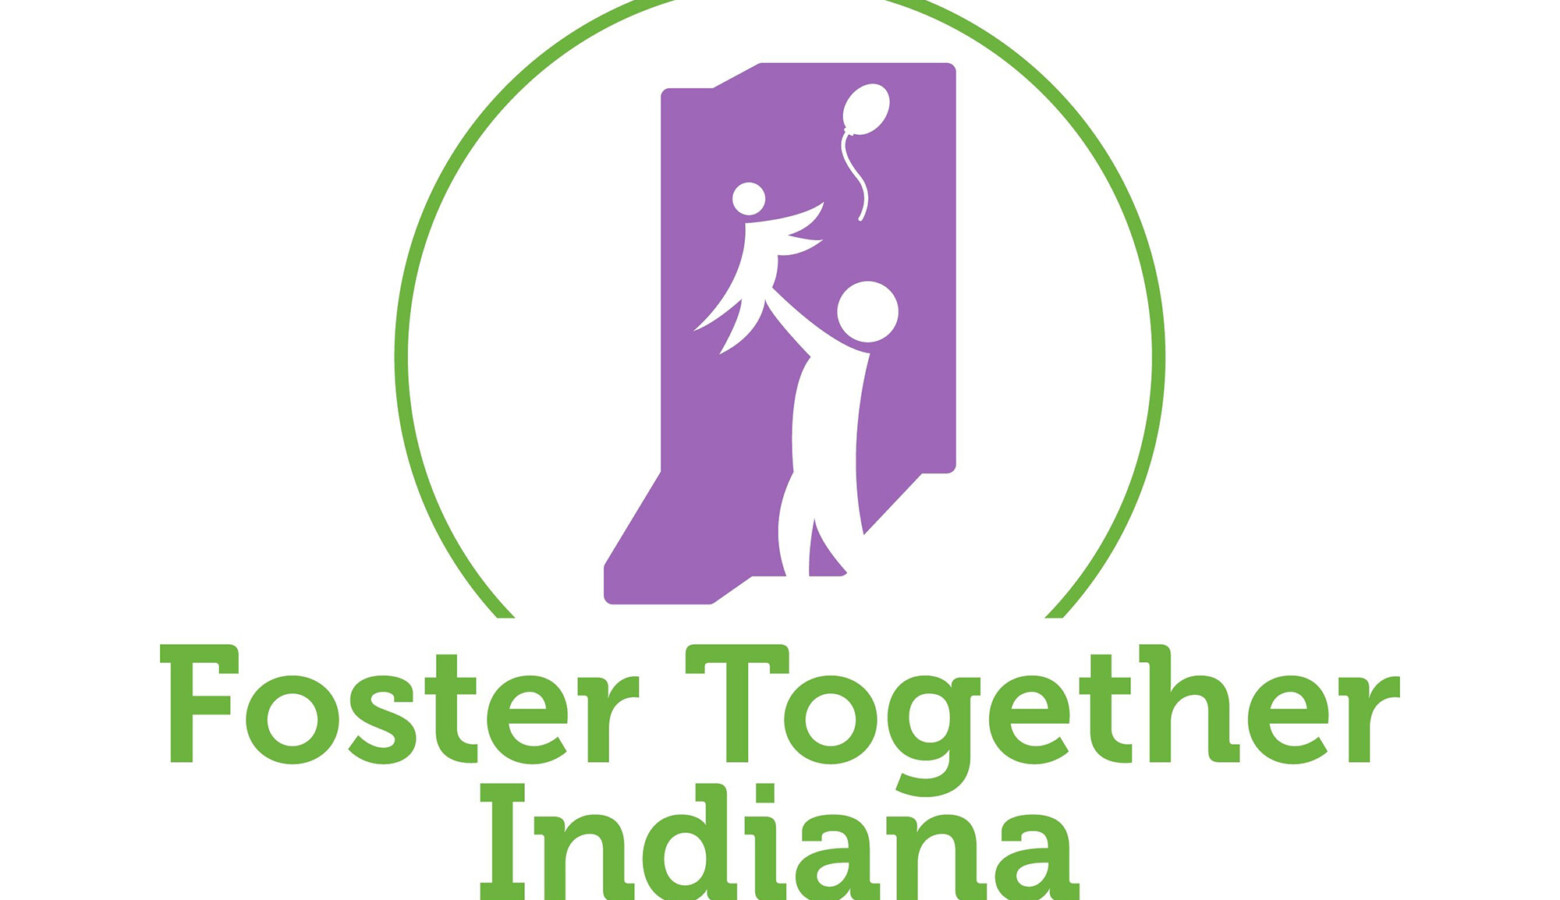 Foster Together Indiana founder Takkeem Morgan said the idea is to have a collective approach to recruit and retain foster parents. (Courtesy of FosterTogetherIndiana.org)